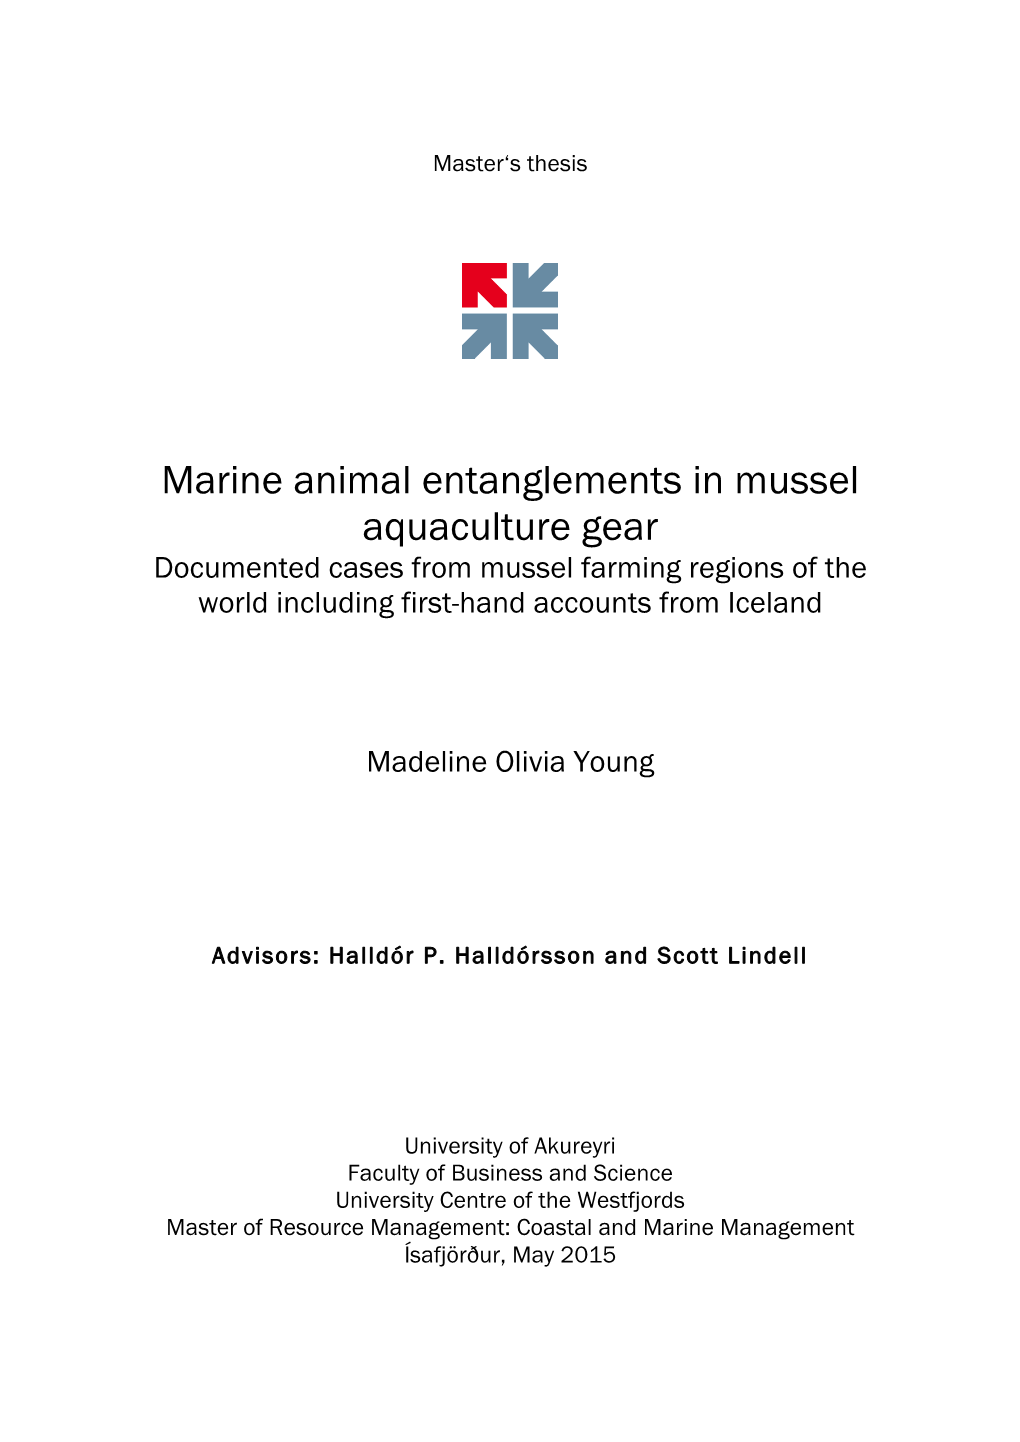 Marine Animal Entanglements in Mussel Aquaculture Gear Documented Cases from Mussel Farming Regions of the World Including First-Hand Accounts from Iceland